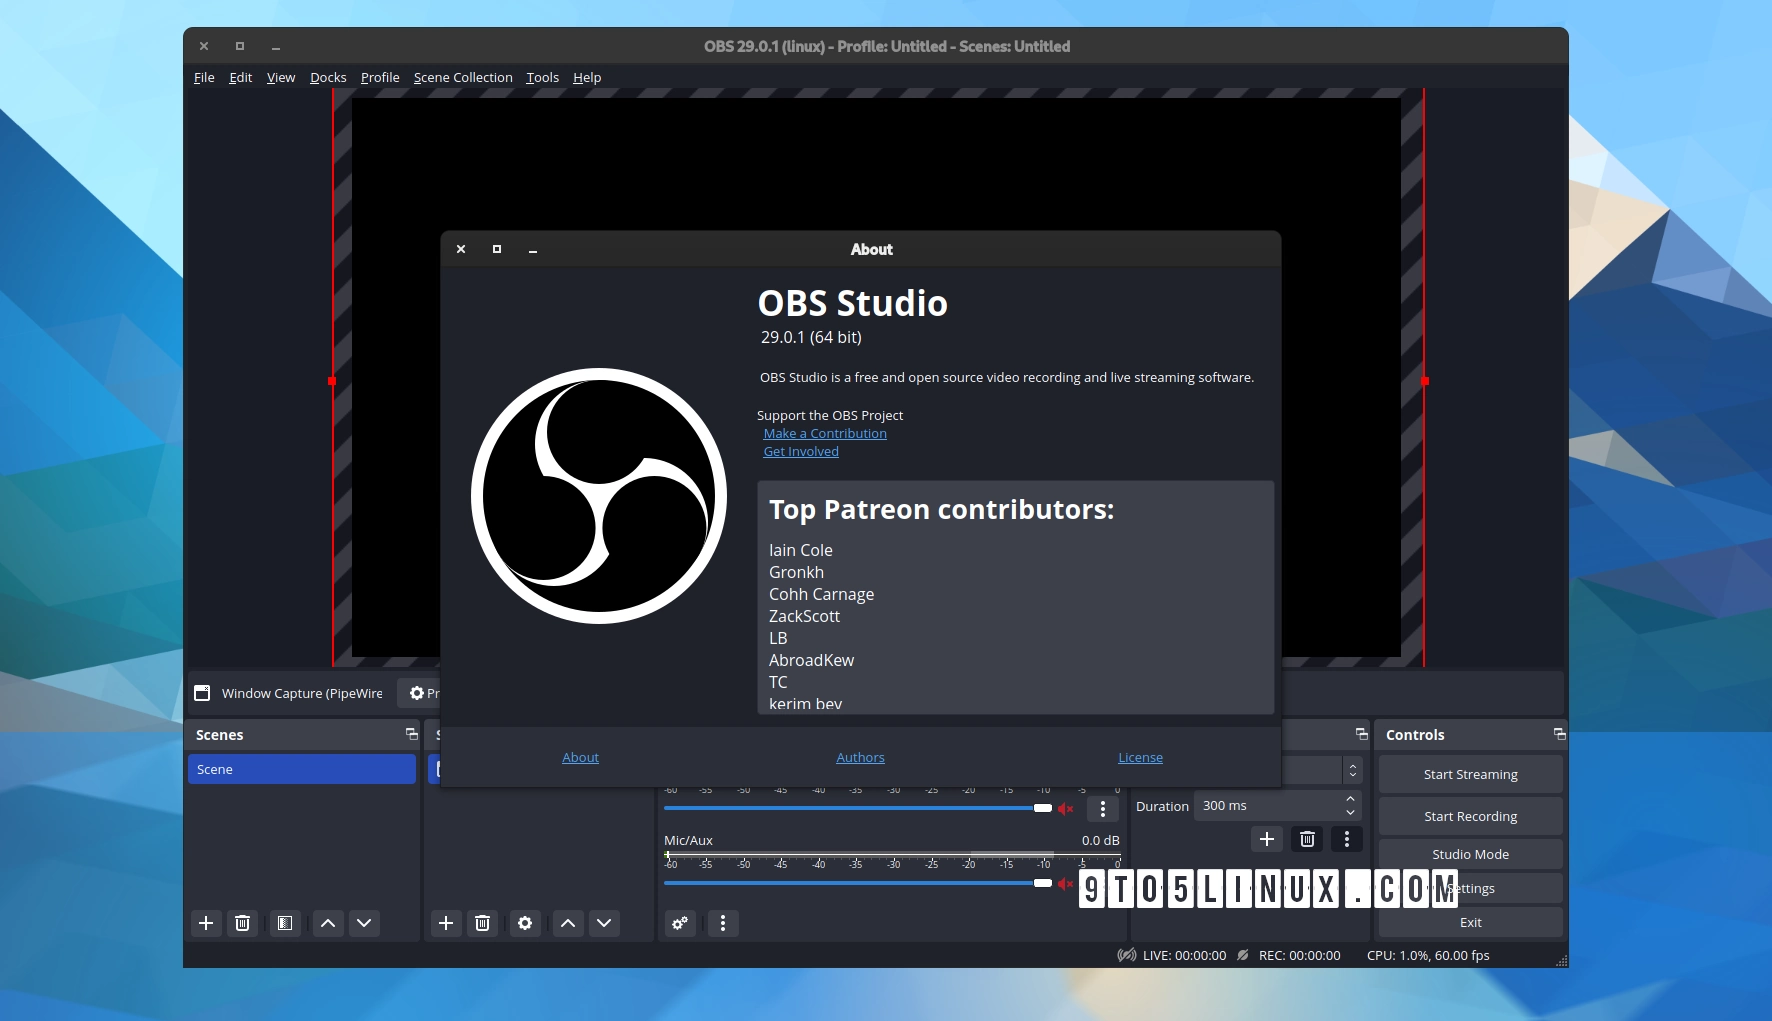 OBS Studio 29.0.1 Is Out to Fix Linux Crash on Wayland, X11 Capture Issue